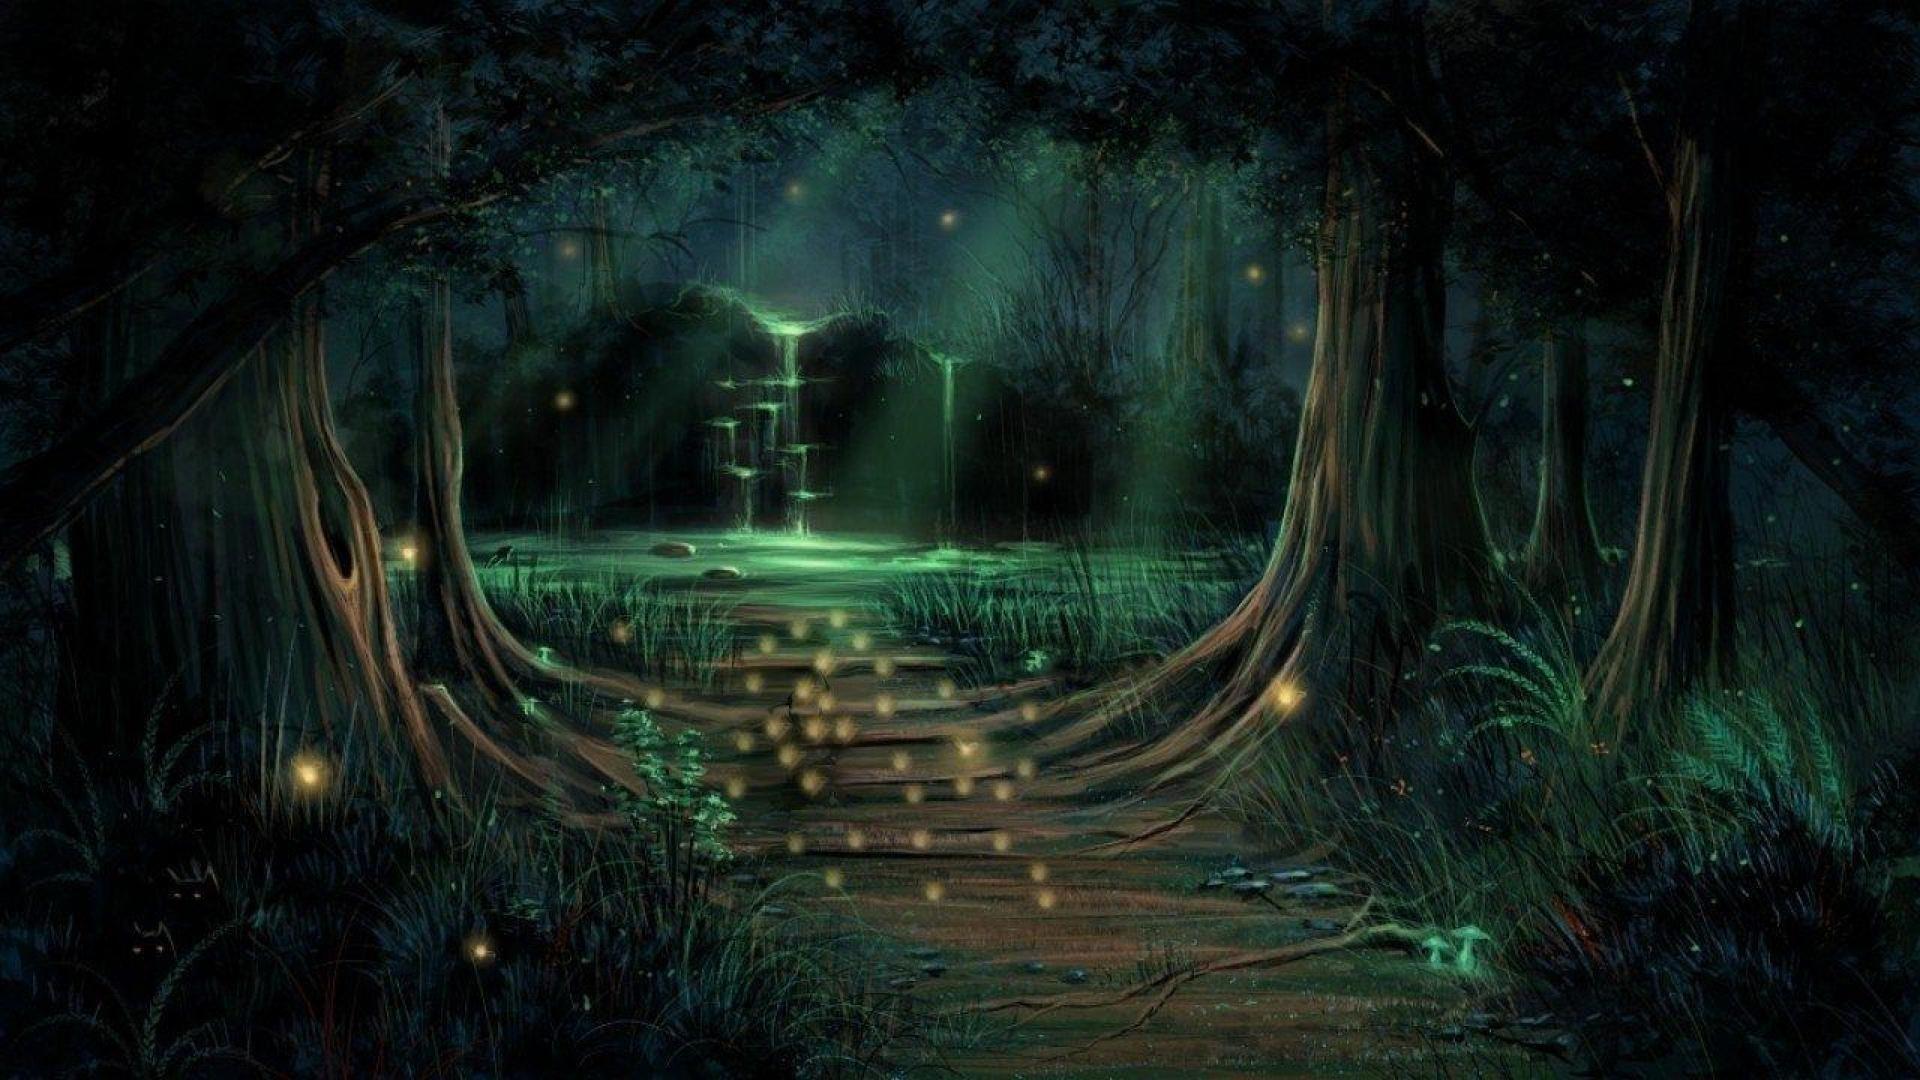 Enchanted Forest. Forest wallpaper, Enchanted forest, Magical